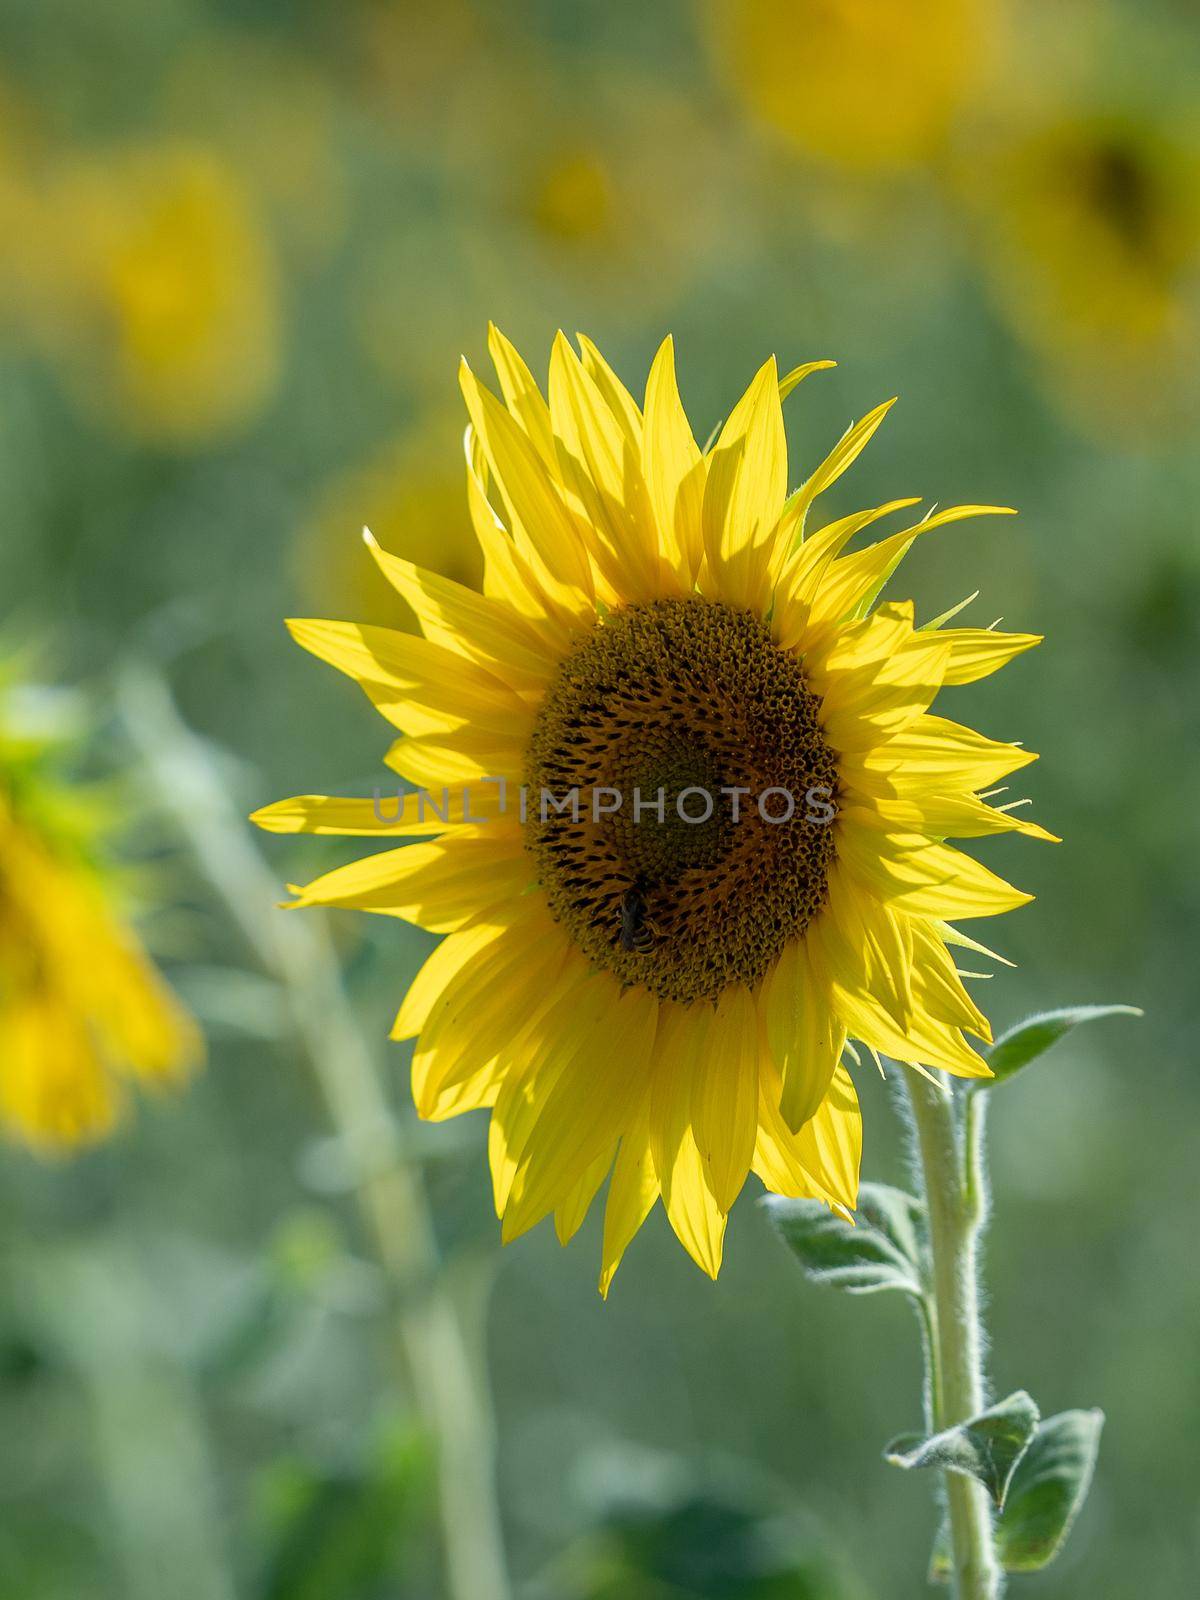 Sunflowers receive the beautiful afternoon sun by martinscphoto